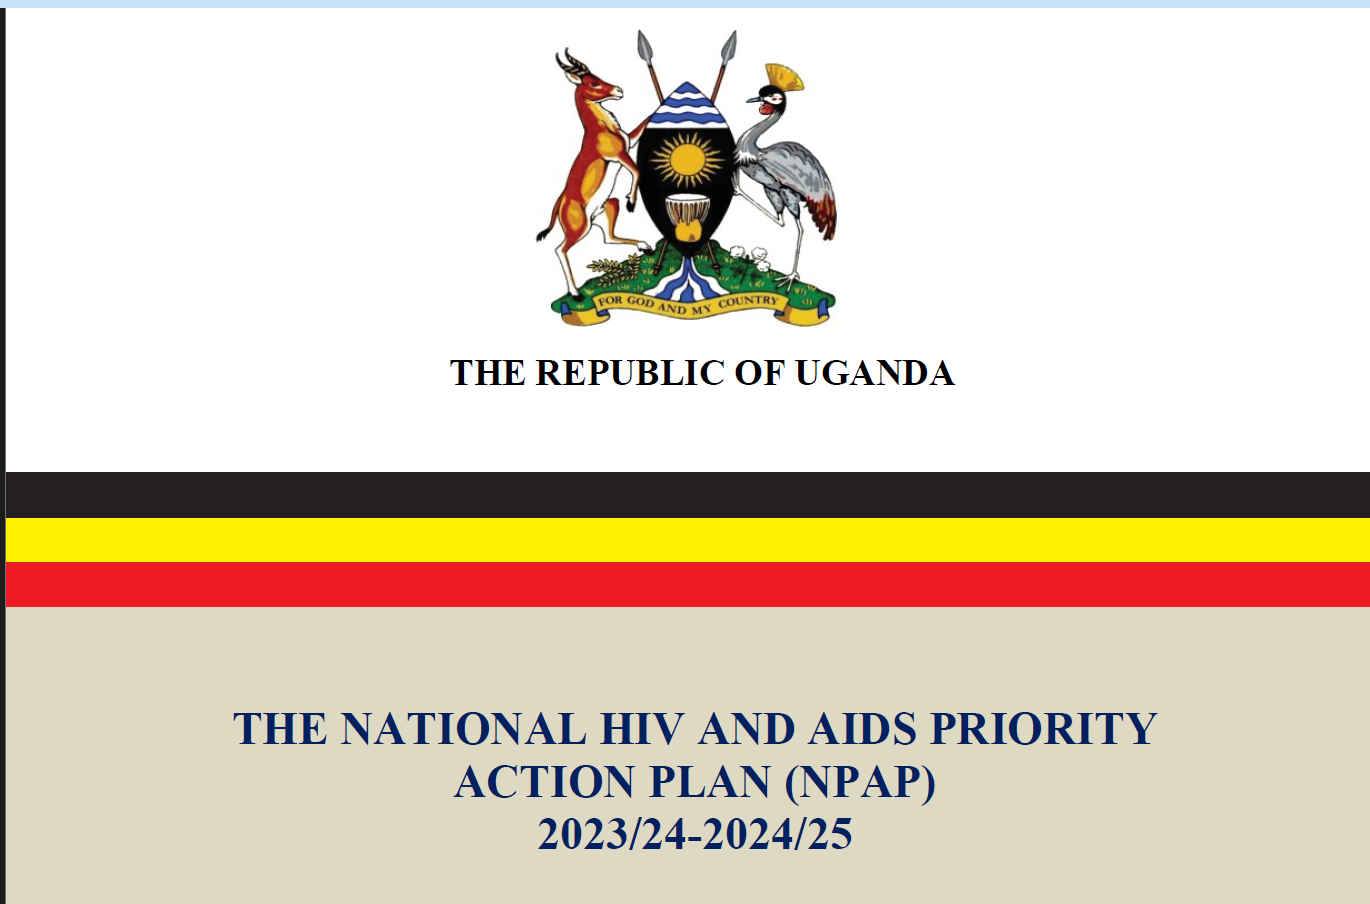 THE NATIONAL HIV AND AIDS PRIORITY ACTION PLAN (NPAP) 2023/24-2024/25 [NPAP]